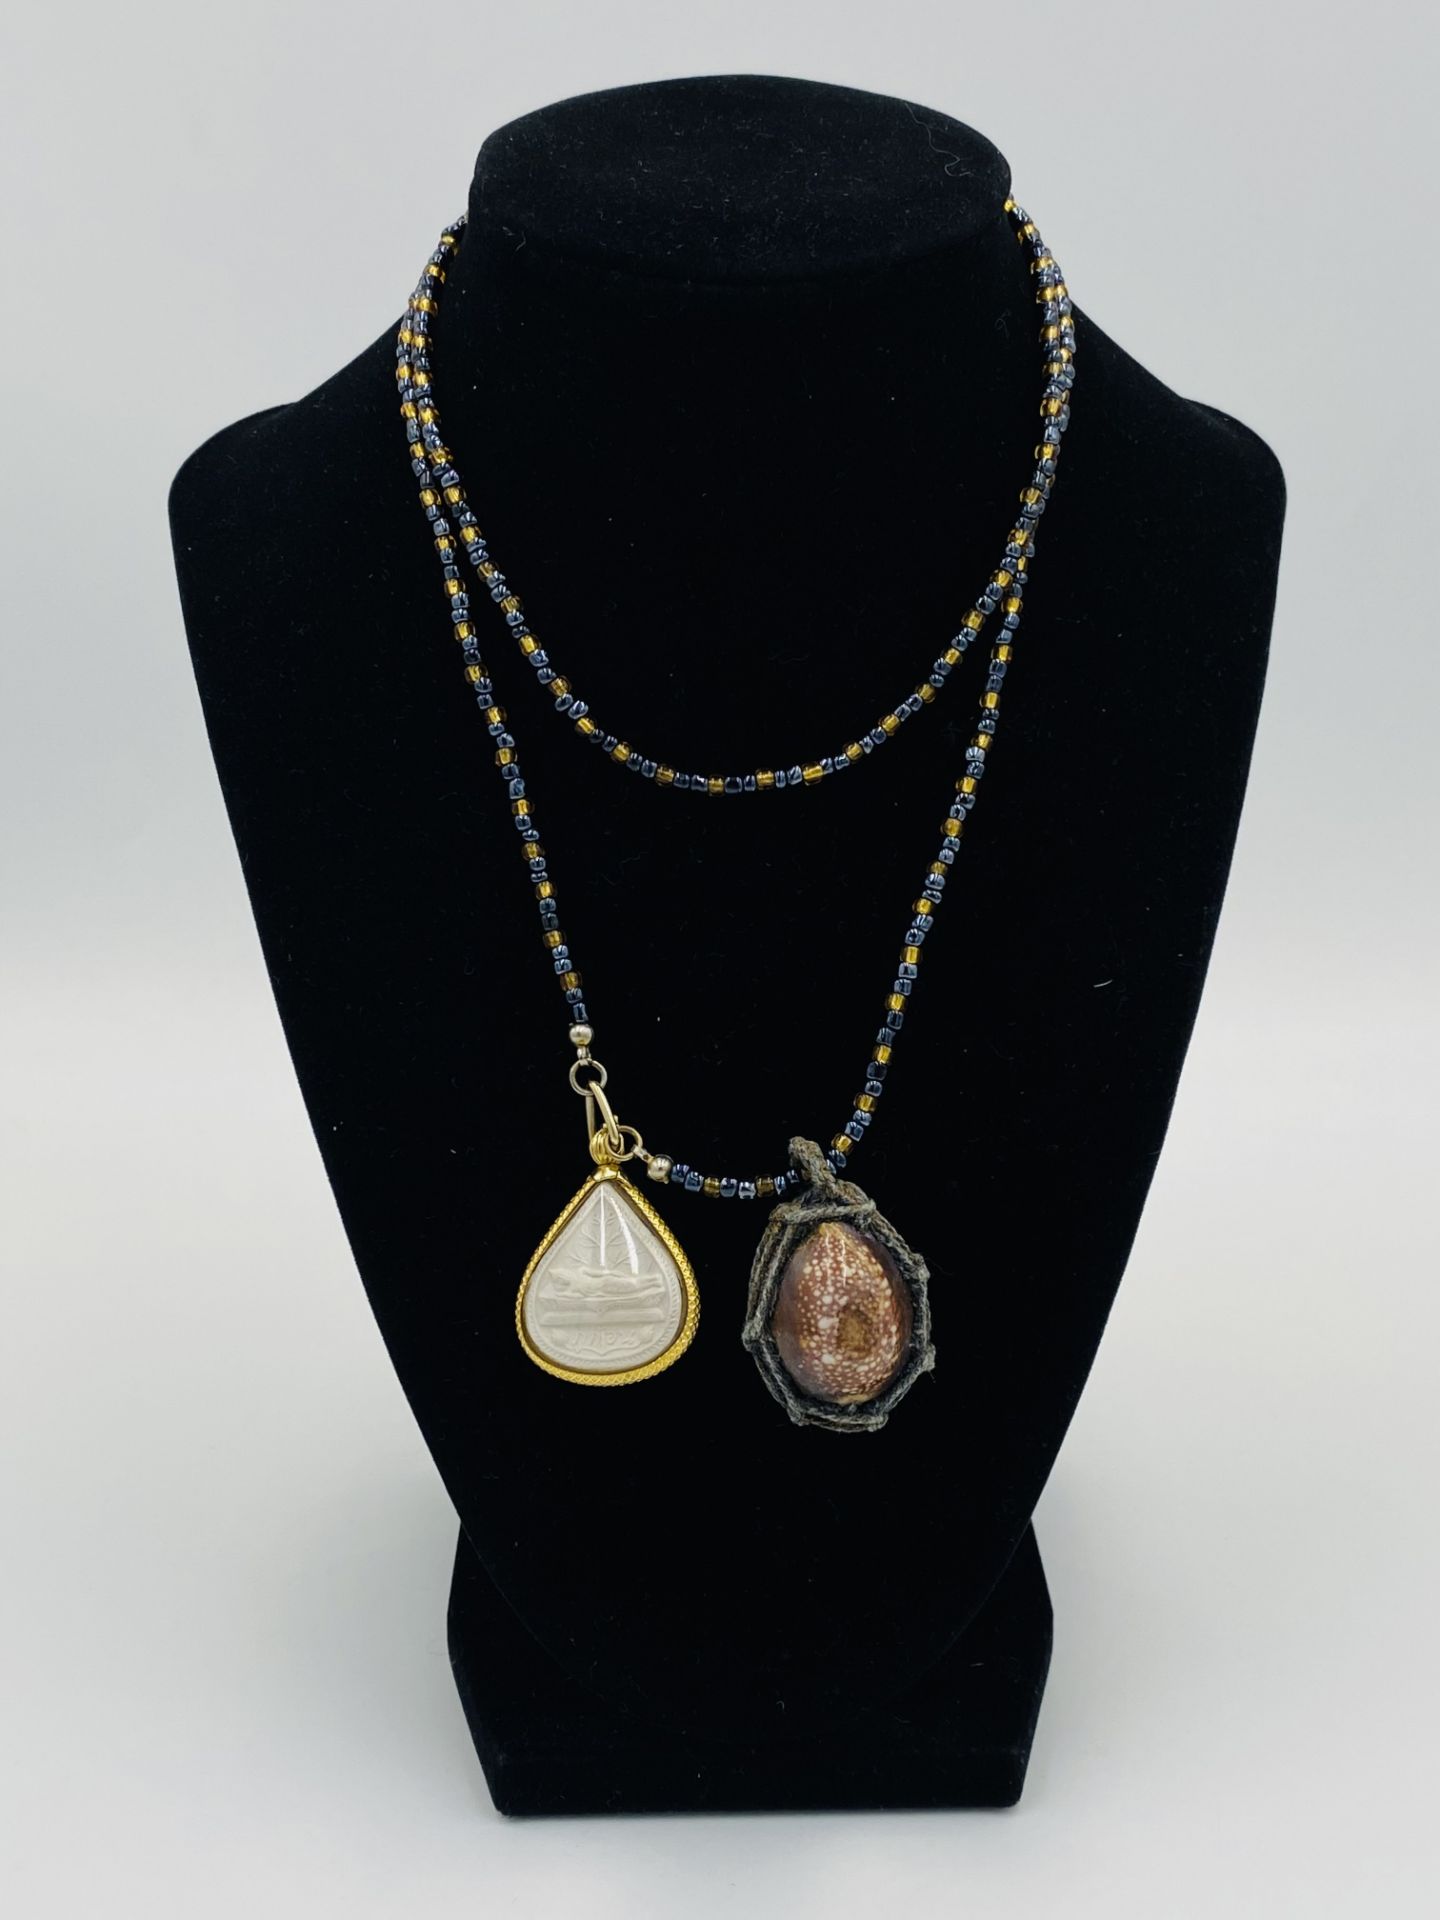 Bead necklace with pendant depicting a reclining Buddha and a 'Bia Kae' pendant. - Image 2 of 5